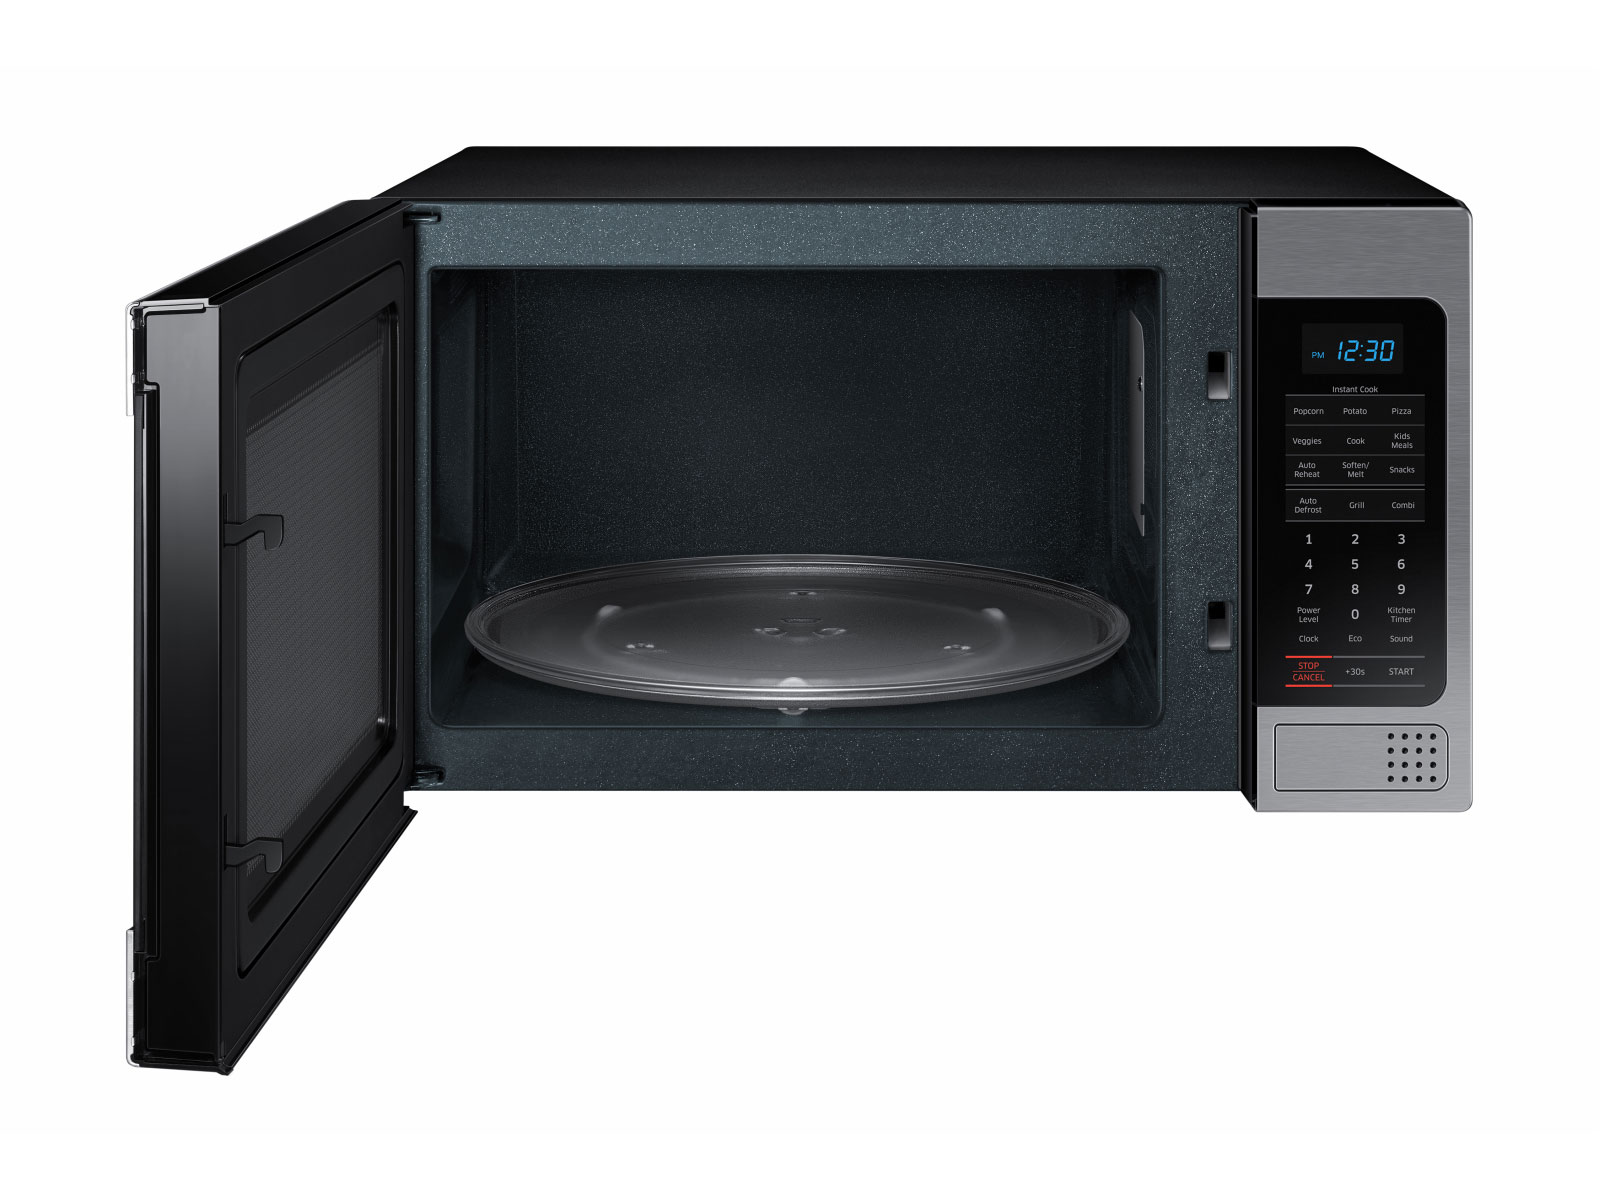 https://image-us.samsung.com/SamsungUS/home/home-appliances/microwaves/countertop/pdp/mg11h2020ct-aa/gallery/02_Microwave_Countertop_MG11H2020CT_Front-open_Empty_Silver.jpg?$product-details-jpg$